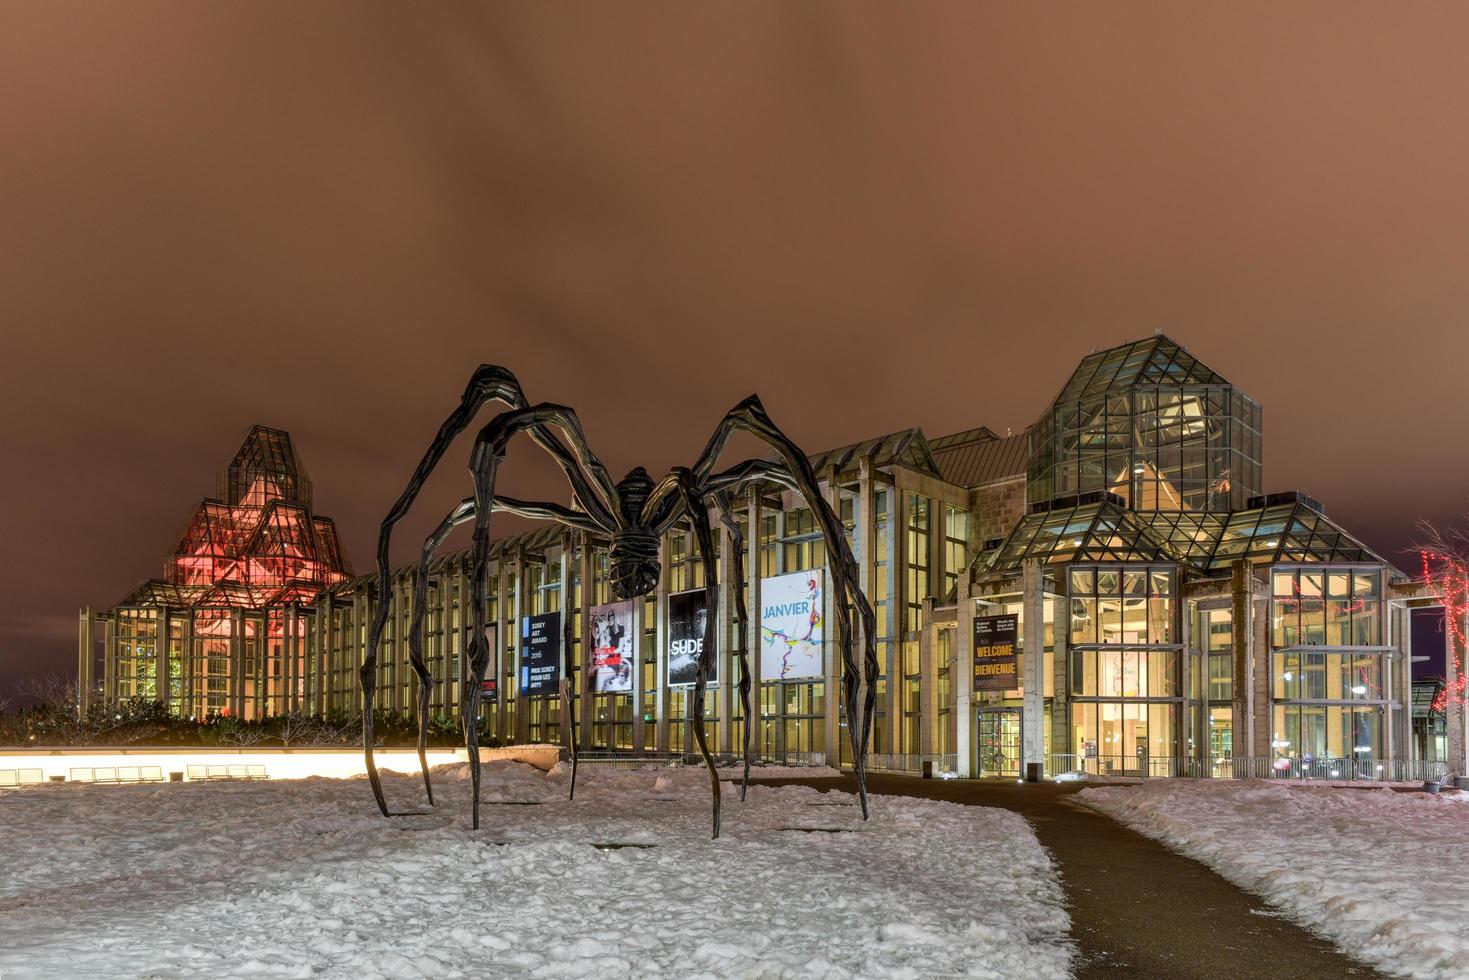 Spider sculpture in front the National Gallery of Canada, Ottawa, 2022 photo